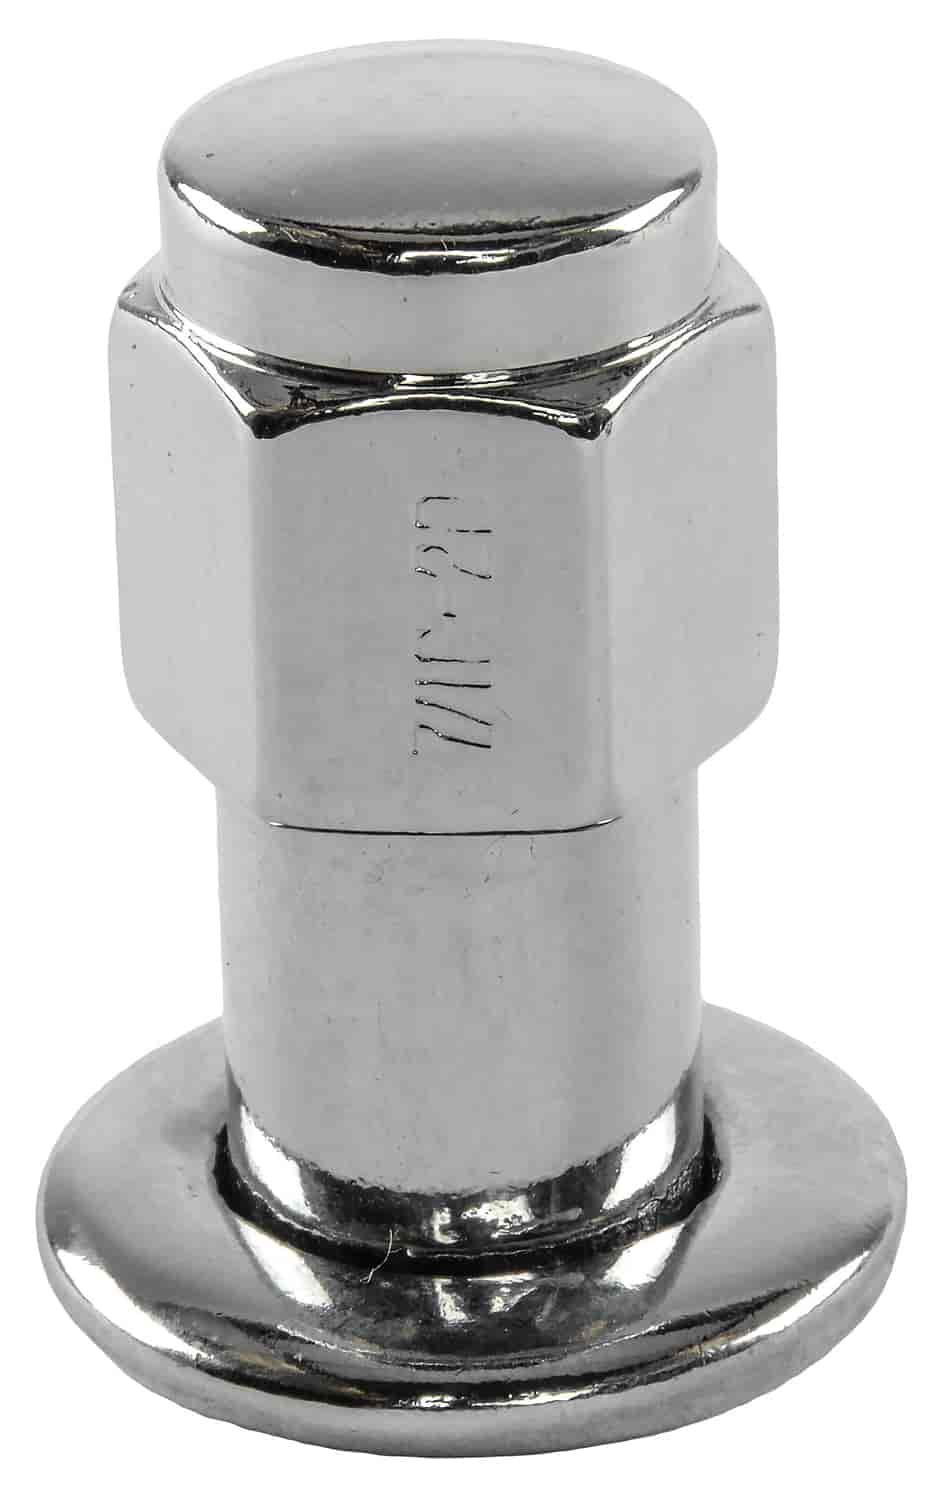 Standard Mag Lug Nuts, Closed-End with Round Washers